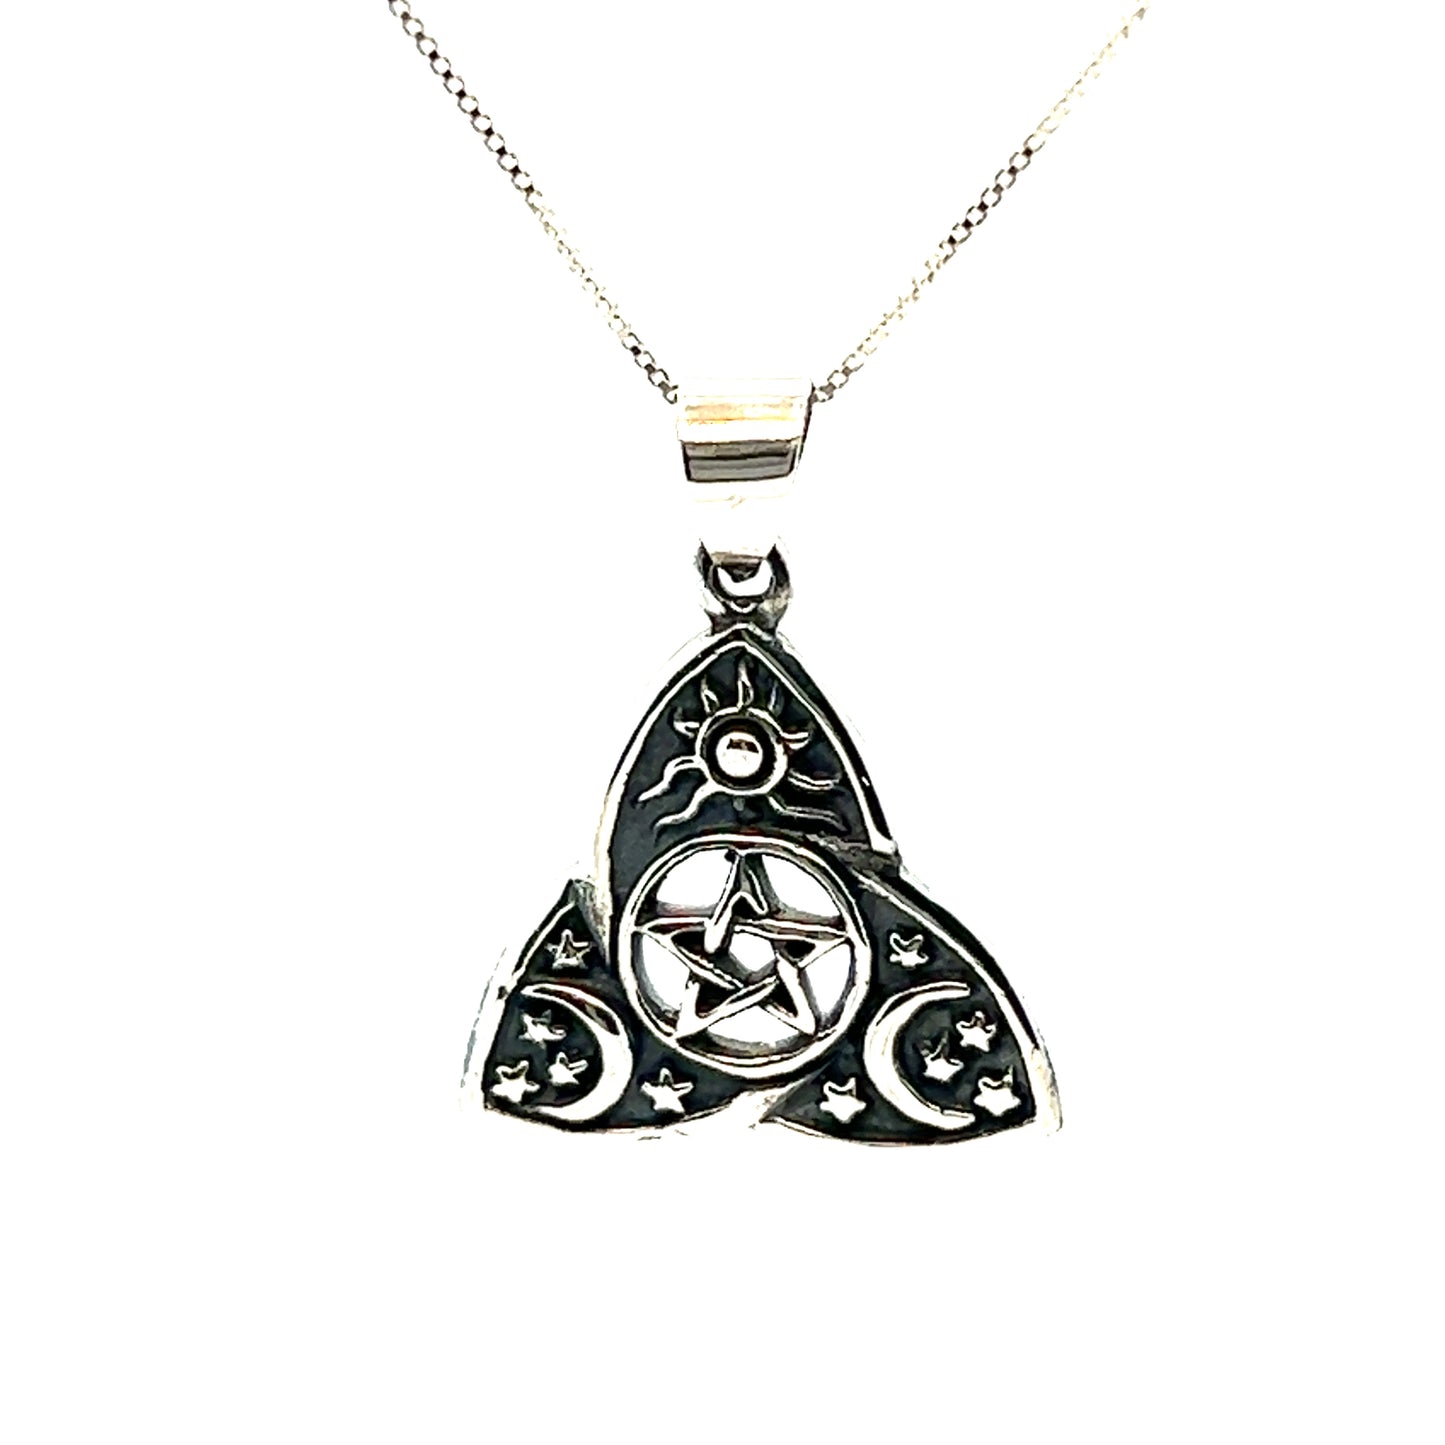 A Triquetra Pentagram Pendant with Celestial Designs necklace from Super Silver, representing balance.